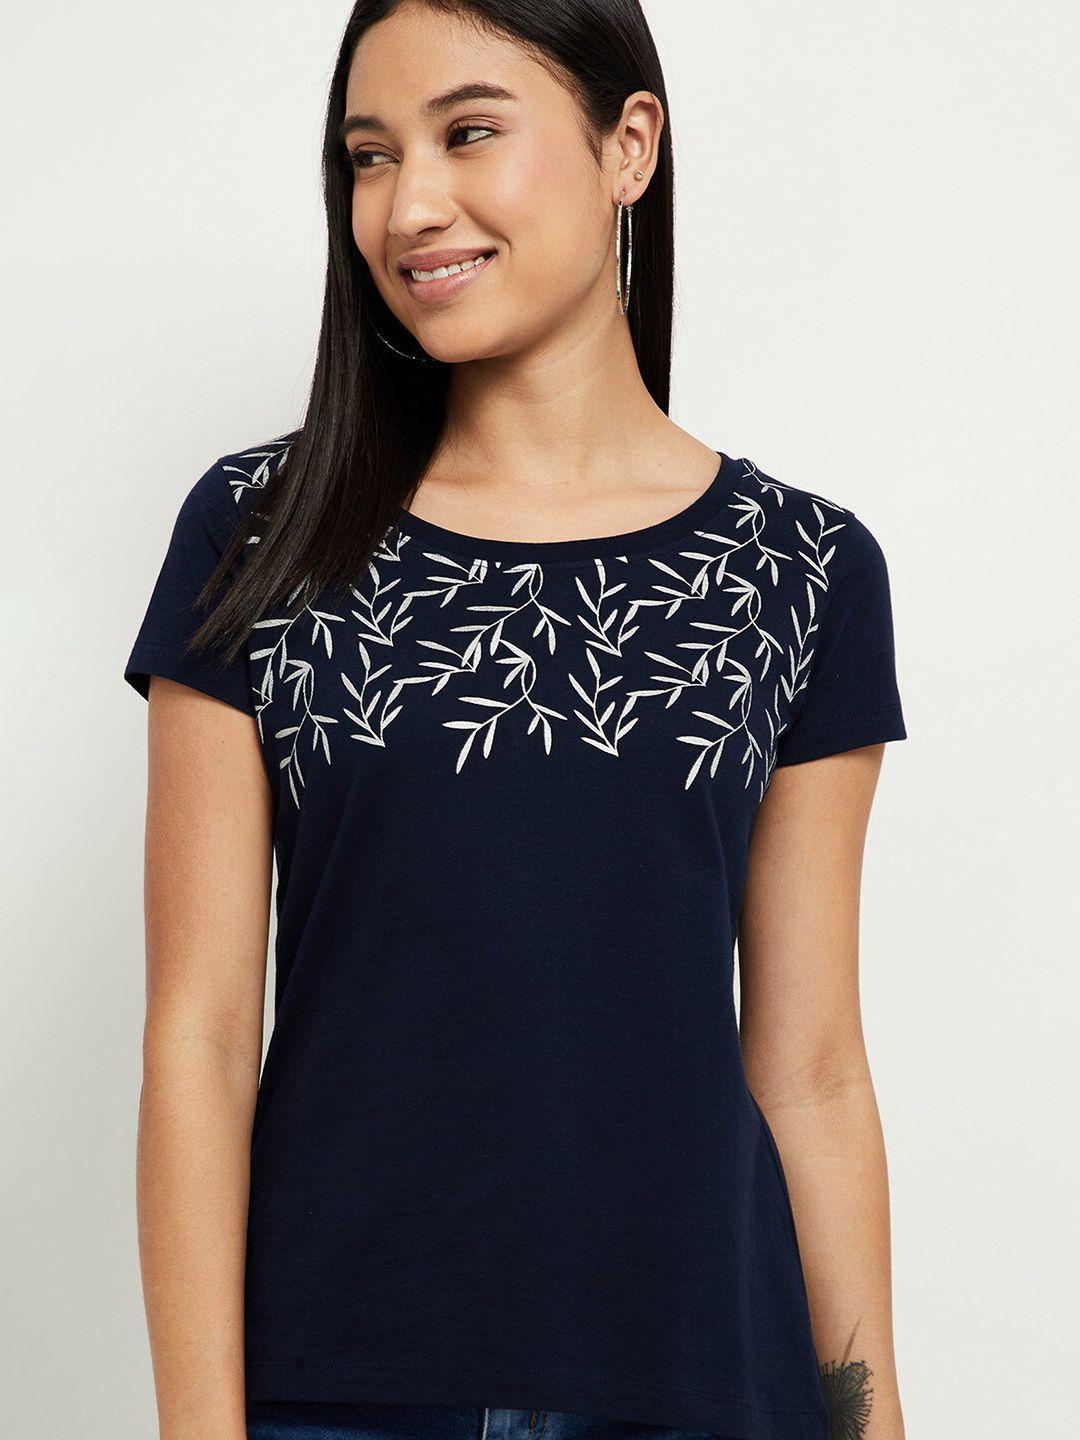 max-women-navy-blue-floral-printed-pure-cotton-t-shirt